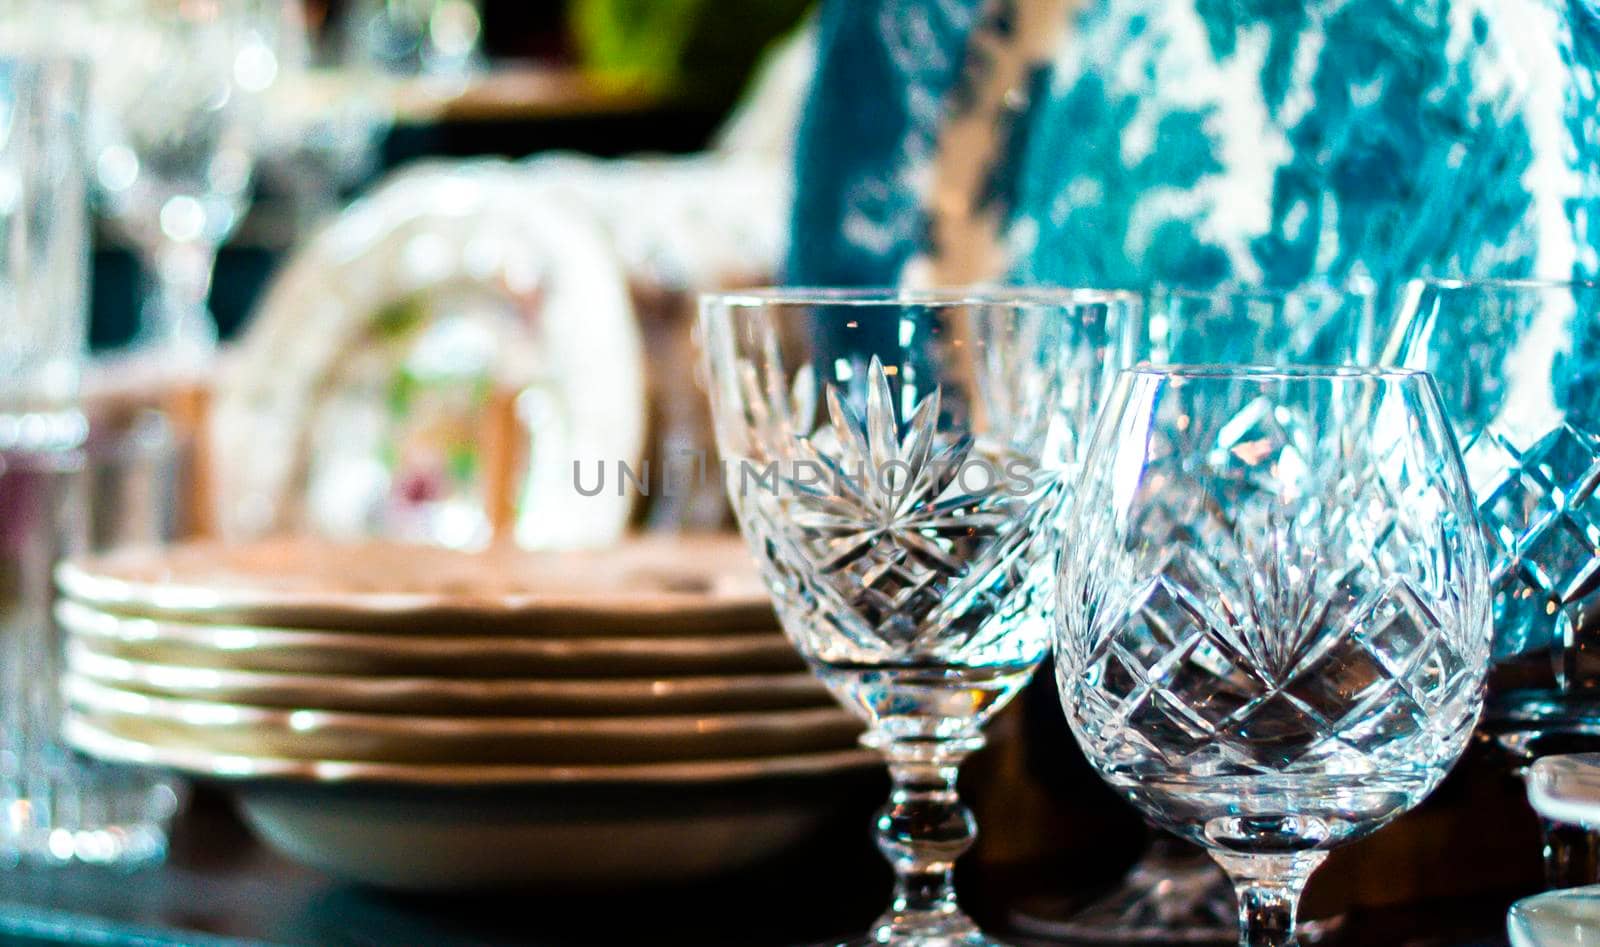 Set of Vintage crystal glasses on the black tray with Christmas decorations. Selective focus